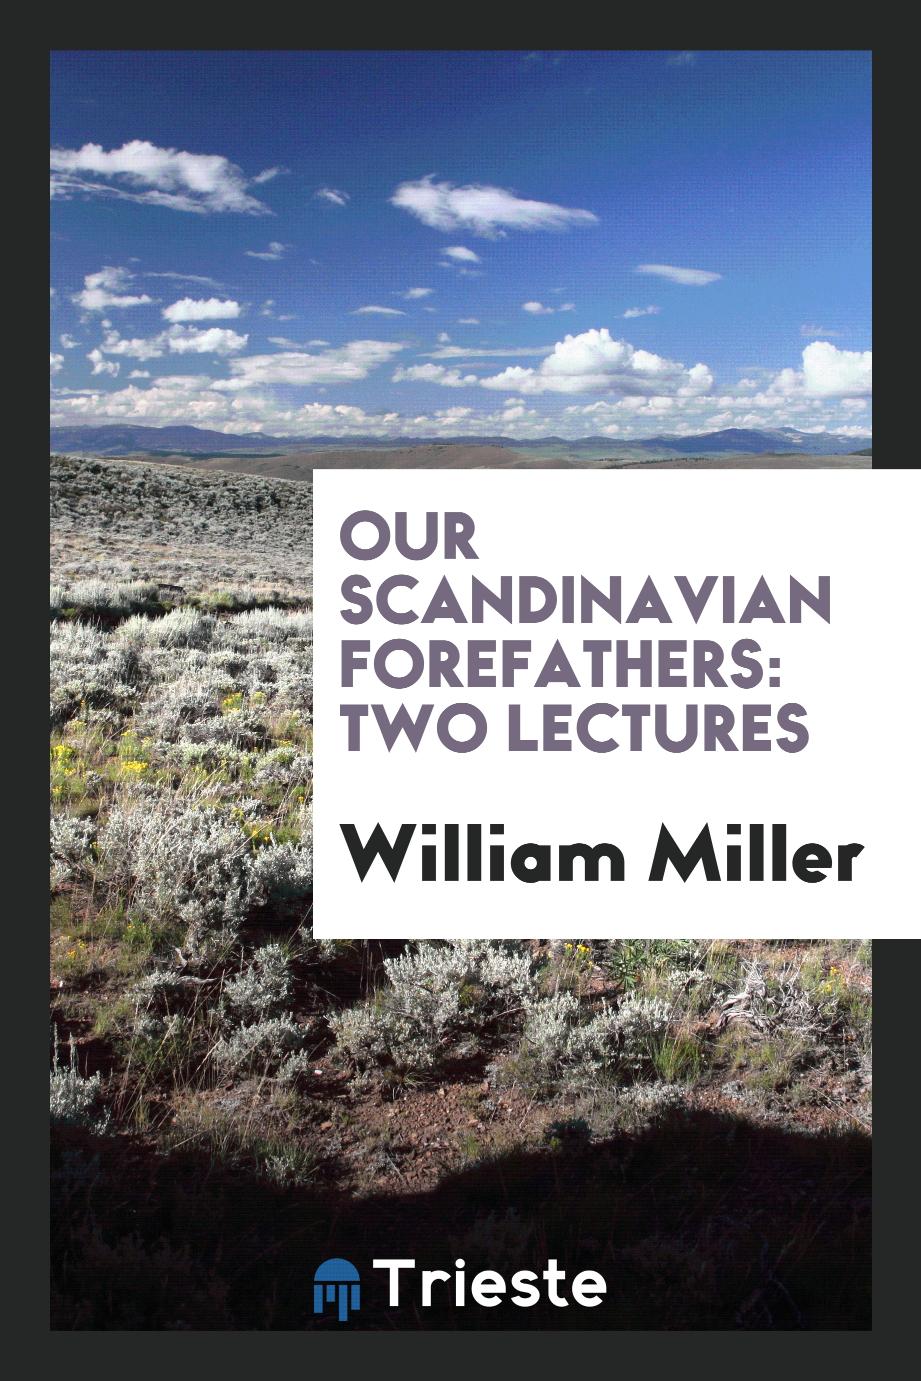 Our Scandinavian forefathers: two lectures